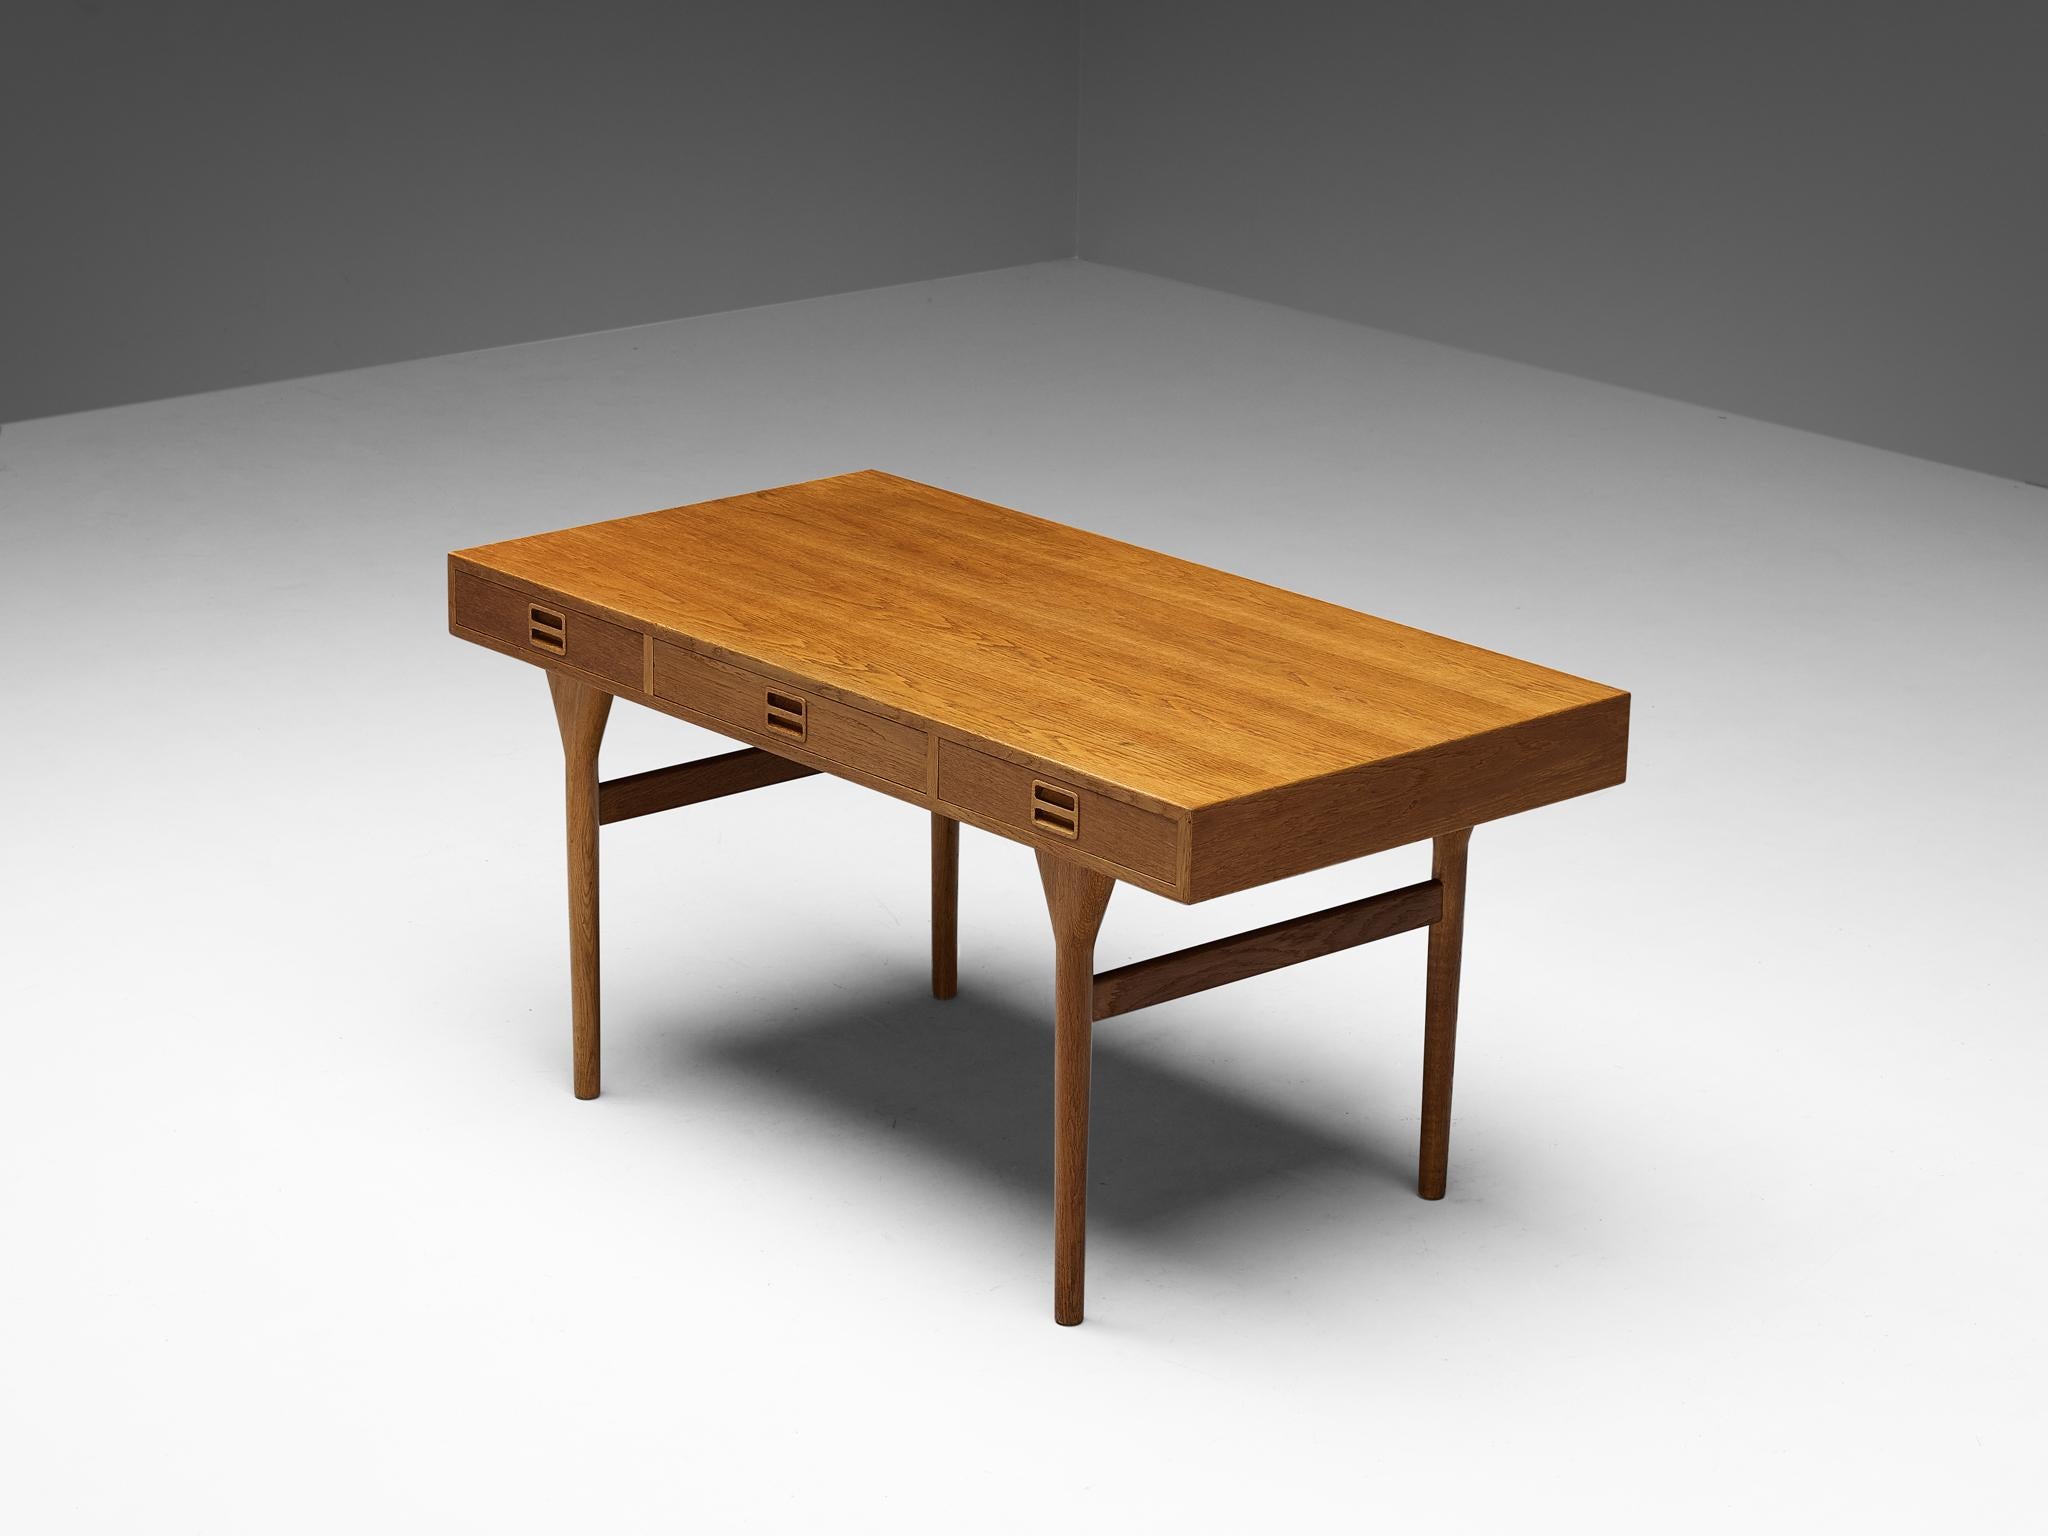 Nanna Ditzel for Søren Willadsen Møbelfabrik, desk, oak, Denmark, design 1955

A beautiful freestanding desk designed by Nanna Ditzel. Flawless in its design and execution, this piece is very slim and elegant. The oak wood is giving this desk a